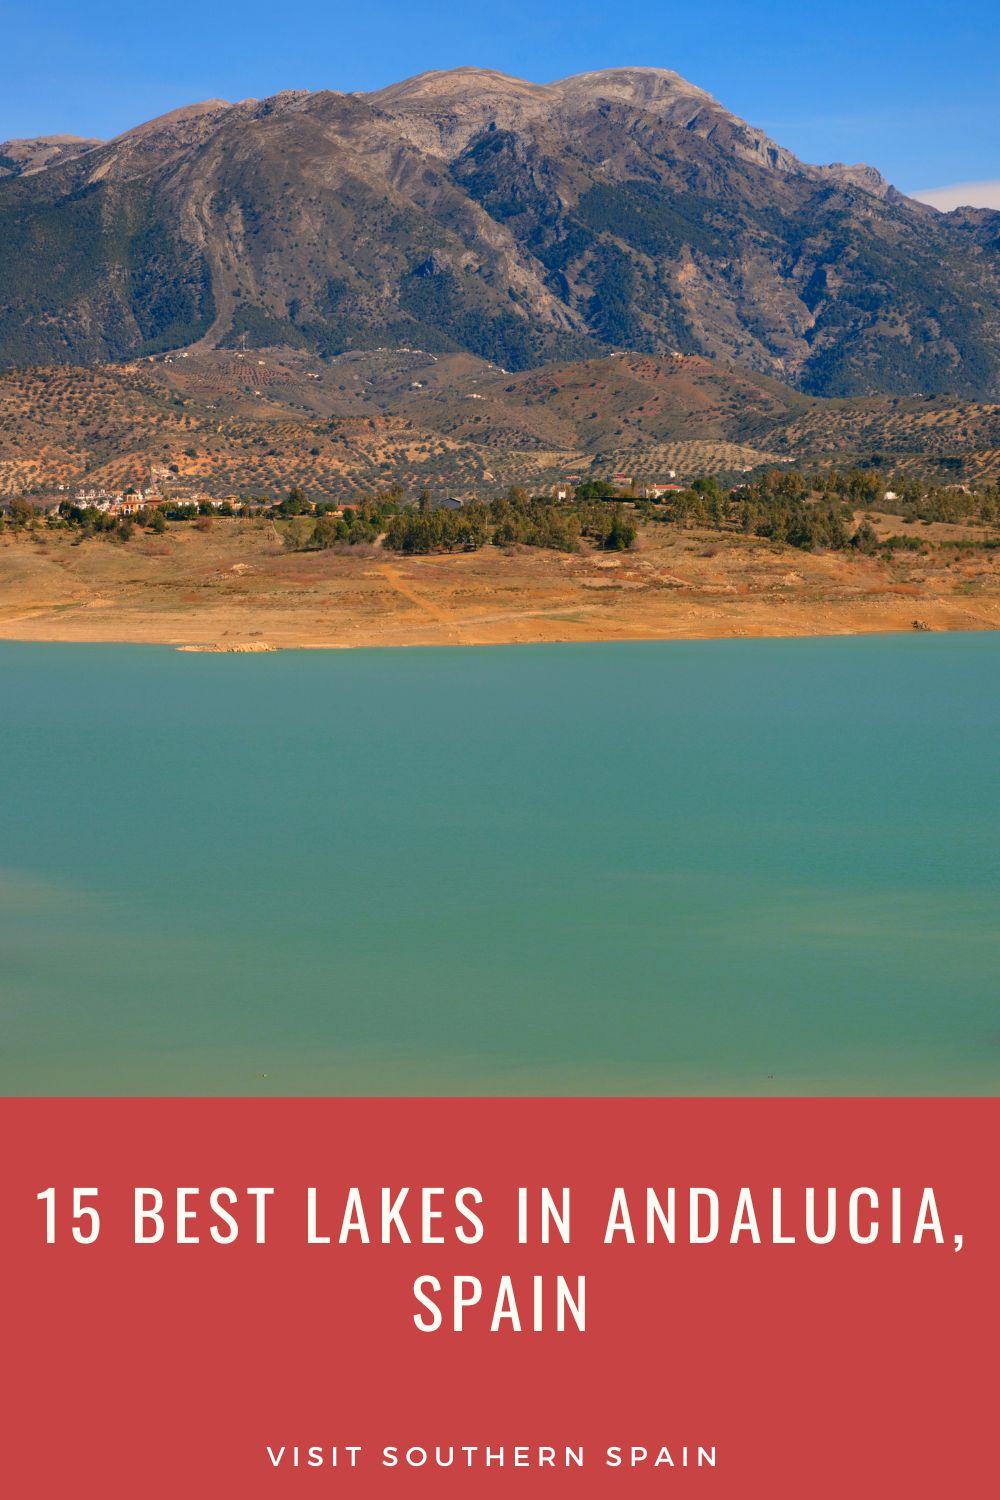 Are you looking for the Best Lakes in Andalucia for Relaxing Getaways? Read all about the lakes in Southern Spain that are perfect for whatever water activity you're thinking of. Whether you're into canoeing, paddling, or swimming there is a lake for everyone. Andalucia has a lot to offer and some of the lakes here will take your breath away. Don't believe us? Take a look at the 15 best lakes in Andalucia and see for yourself. #lakesinadalucia #bestlakes #andaluciatravel #visitandalucia #lakes